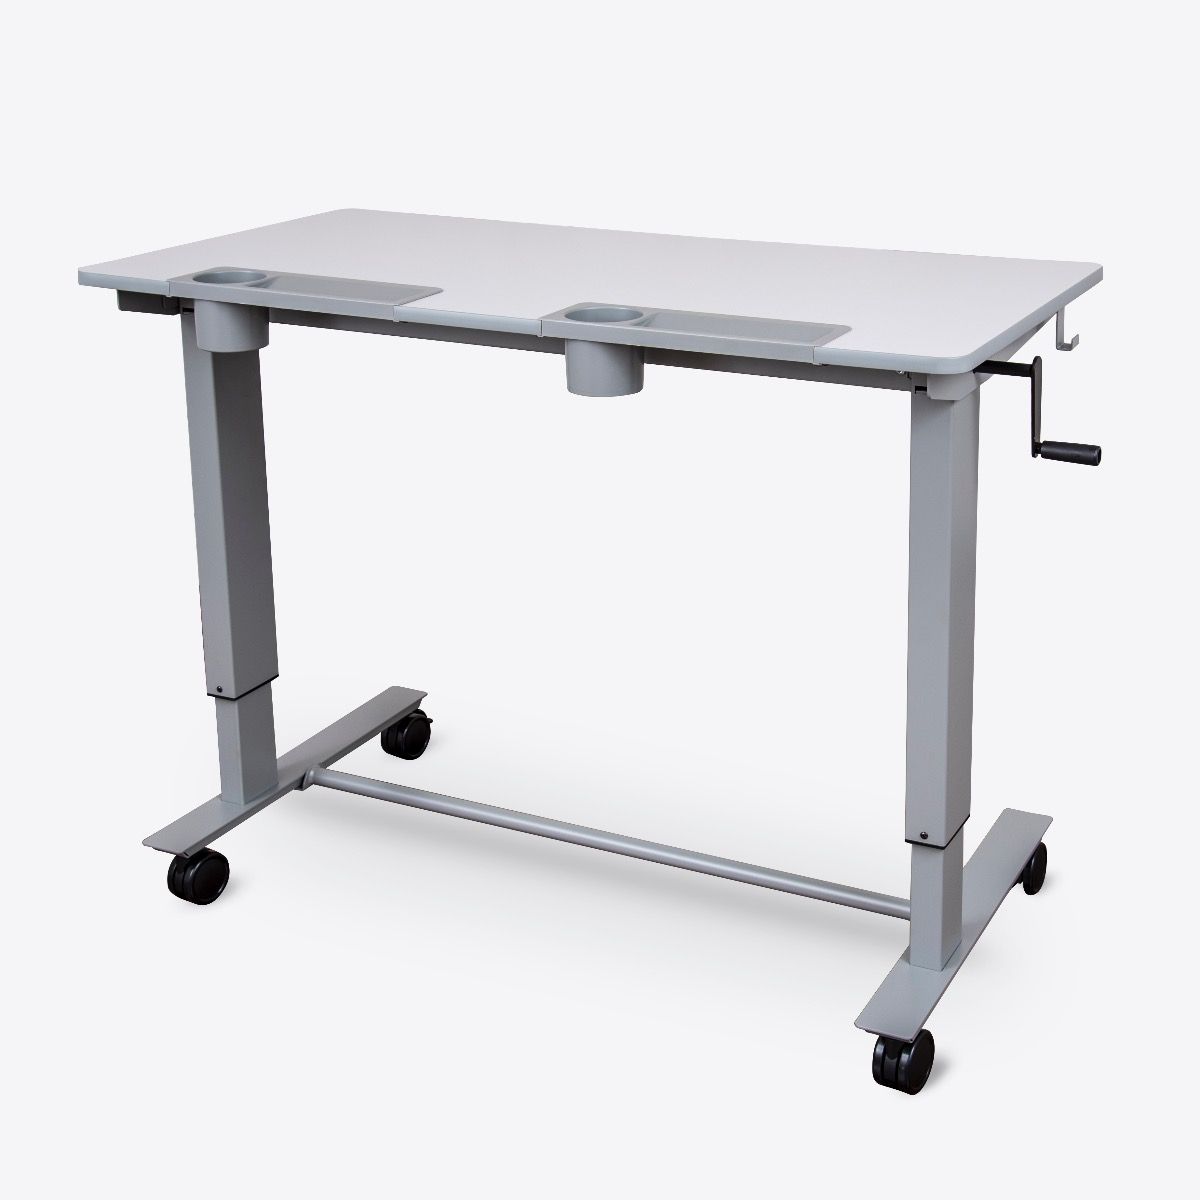 2-student-c Two- Student Standing Desk With Crank - Gray Desktop & Gray Frame